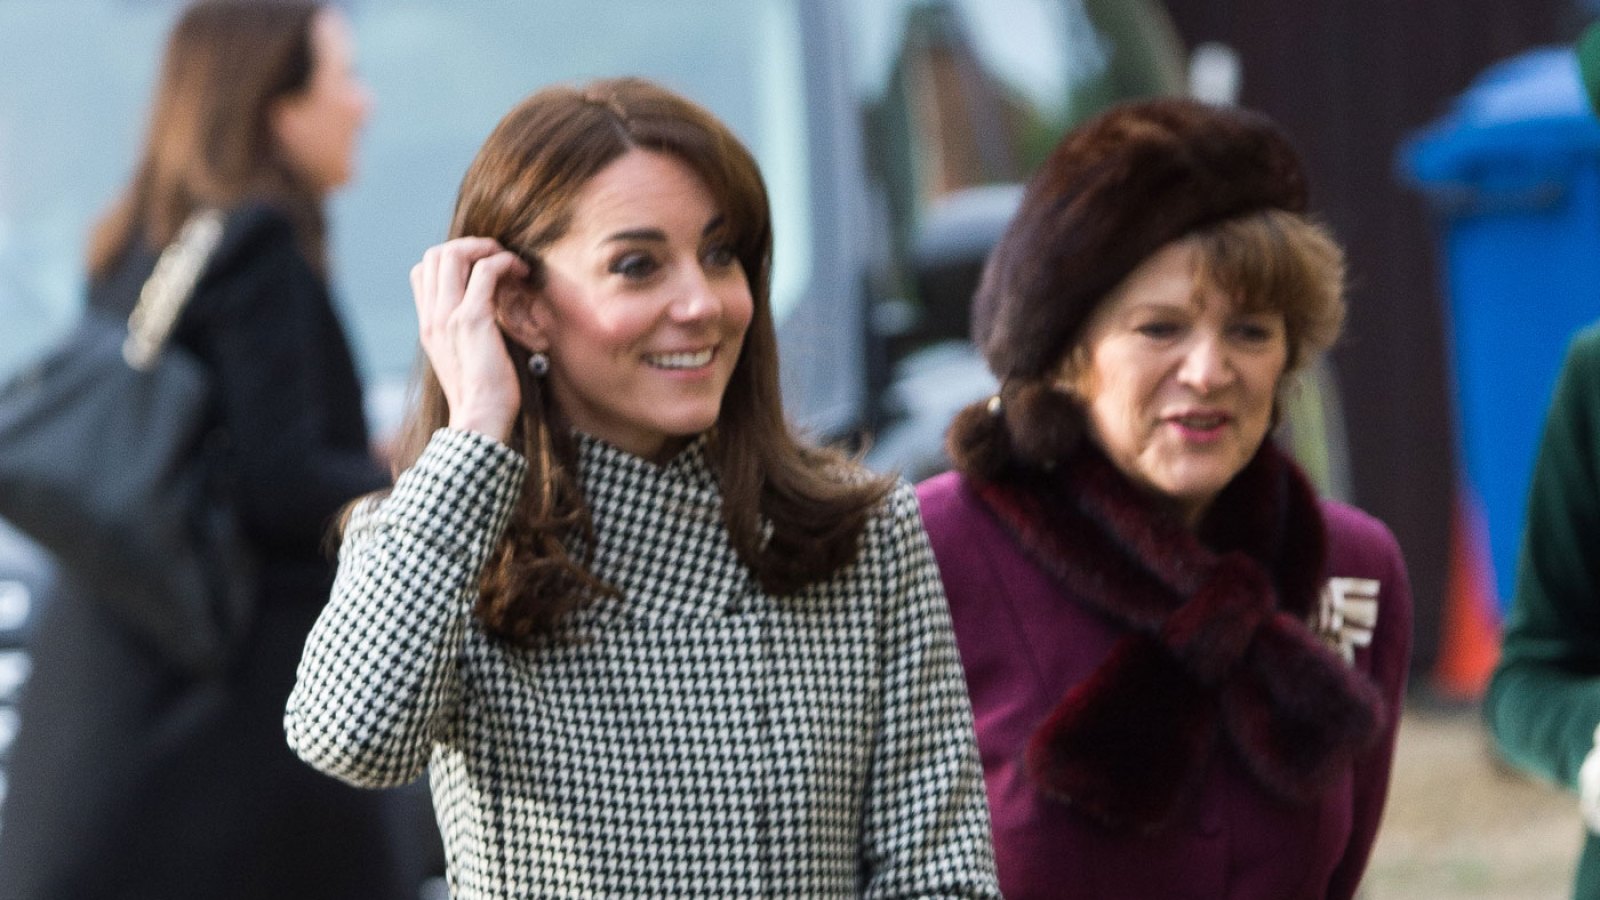 Kate Middleton's latest outfit is a black and white houndstooth coat